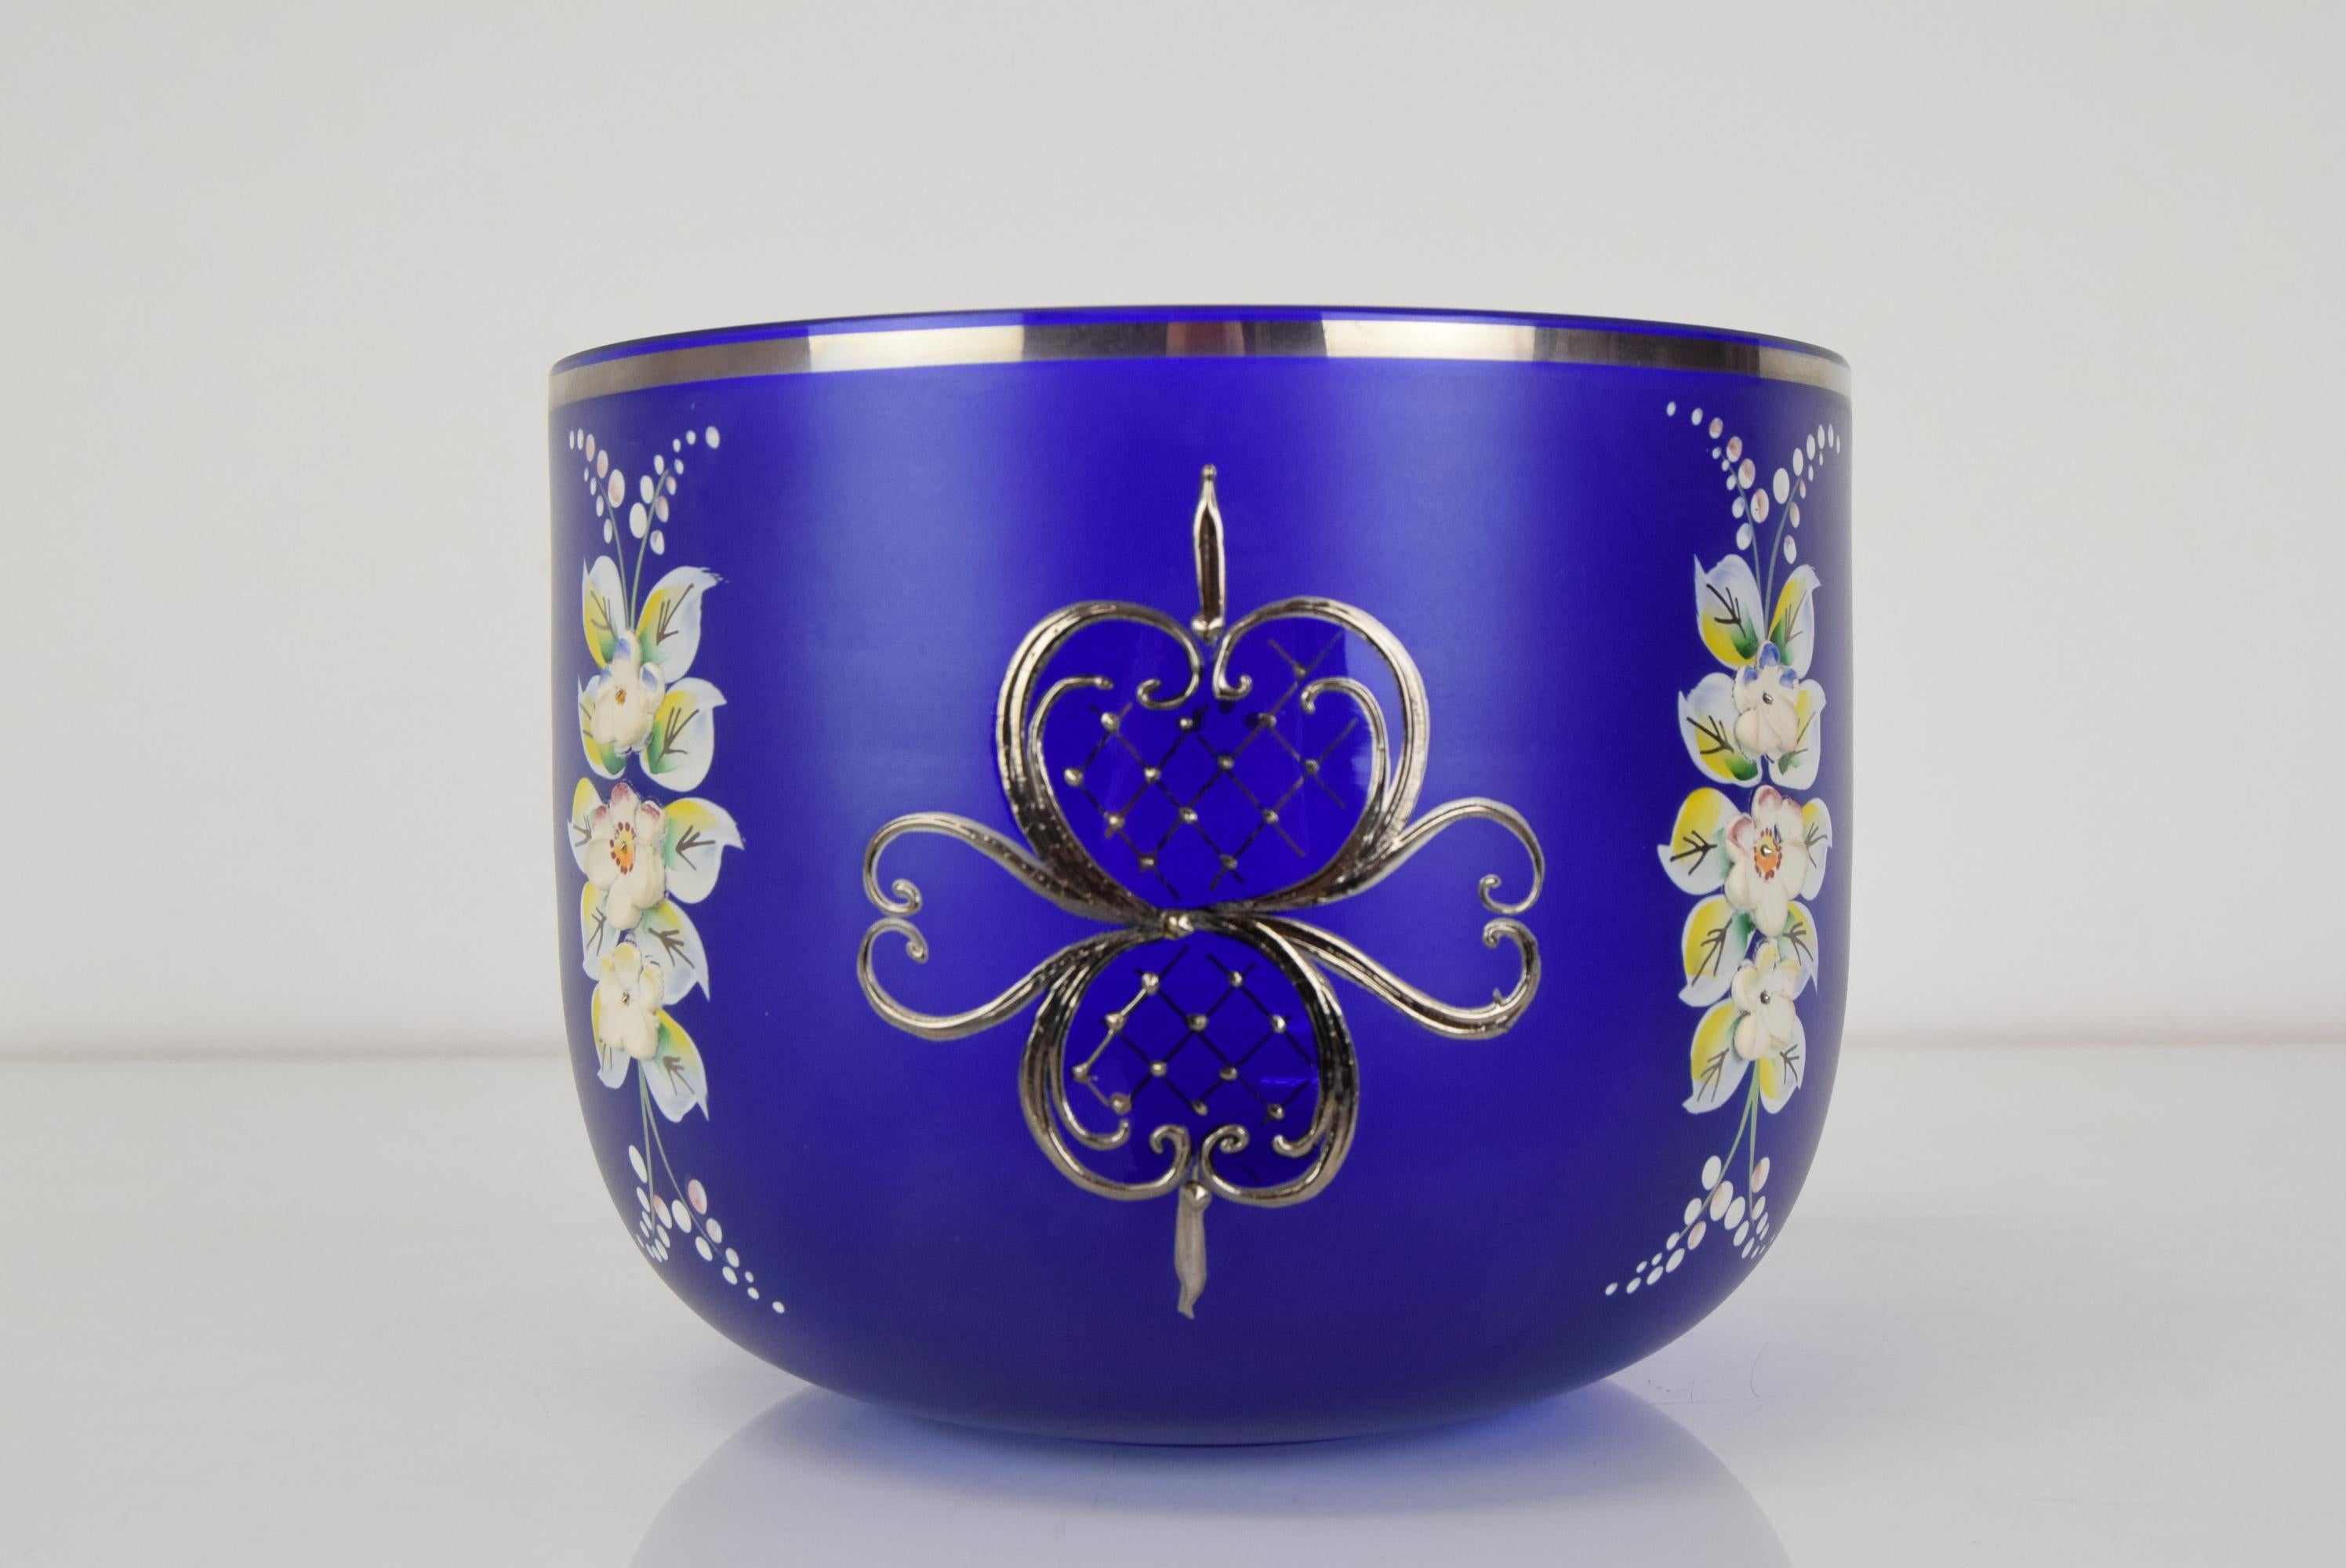 Made in Czechoslovakia
Made of blue cobalt glass
Hand painted
Original condition.